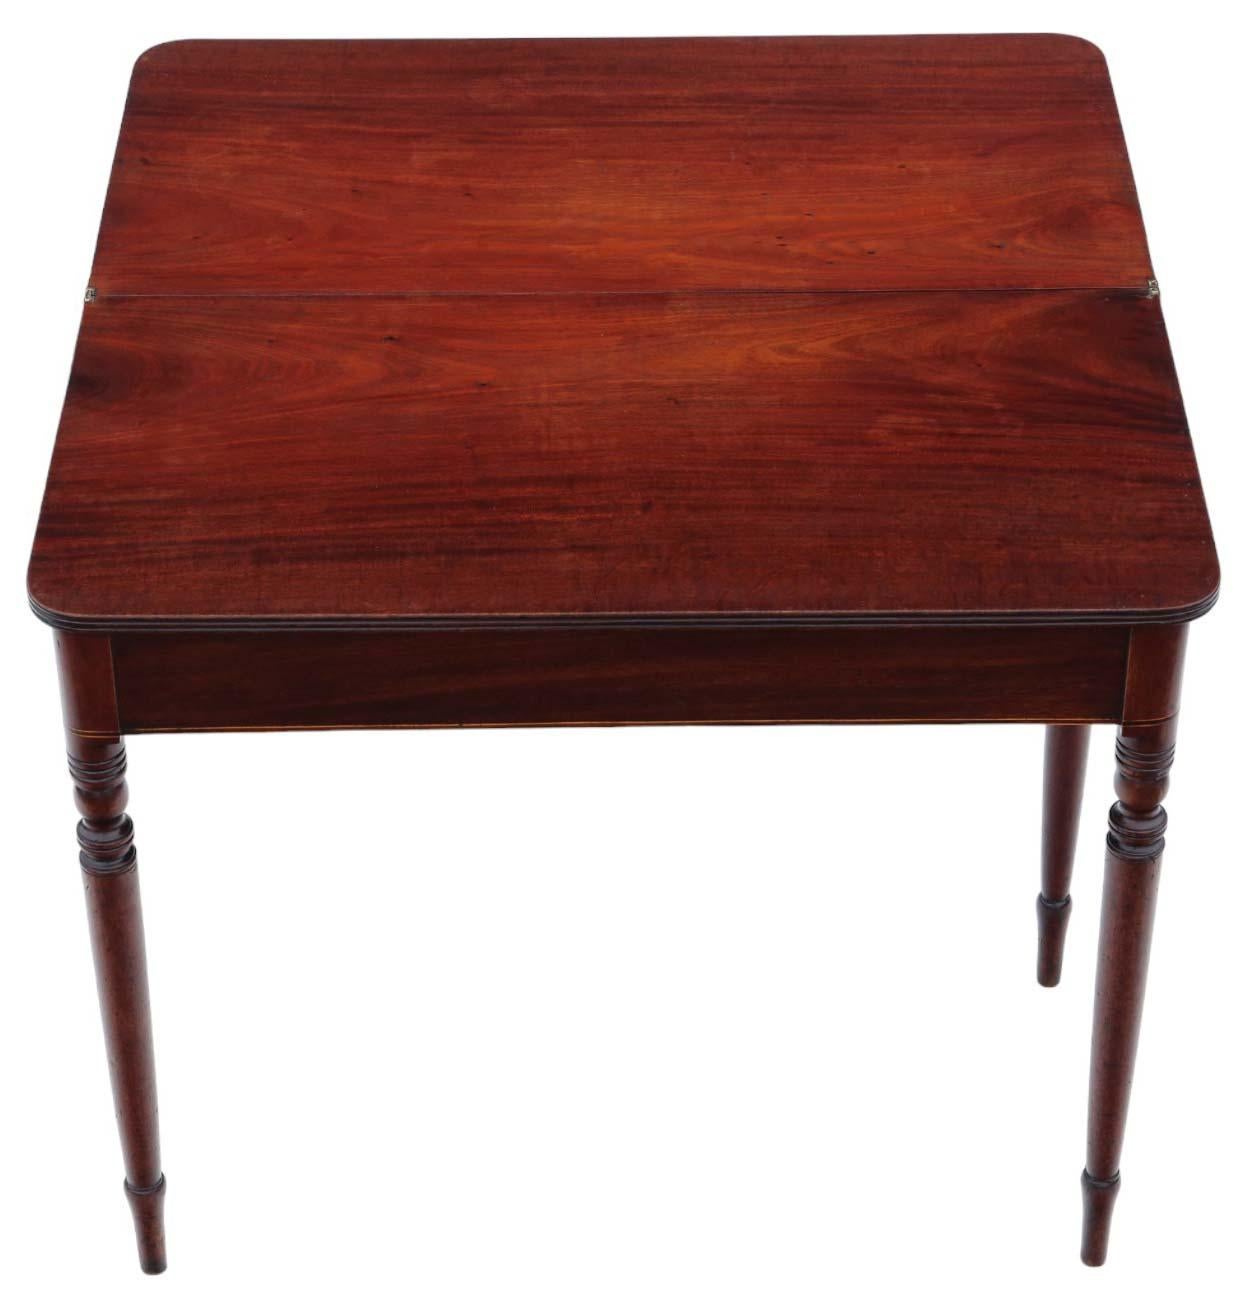 Wood Antique Fine Quality C1800 Inlaid Mahogany Folding Card or Tea Table - Side For Sale